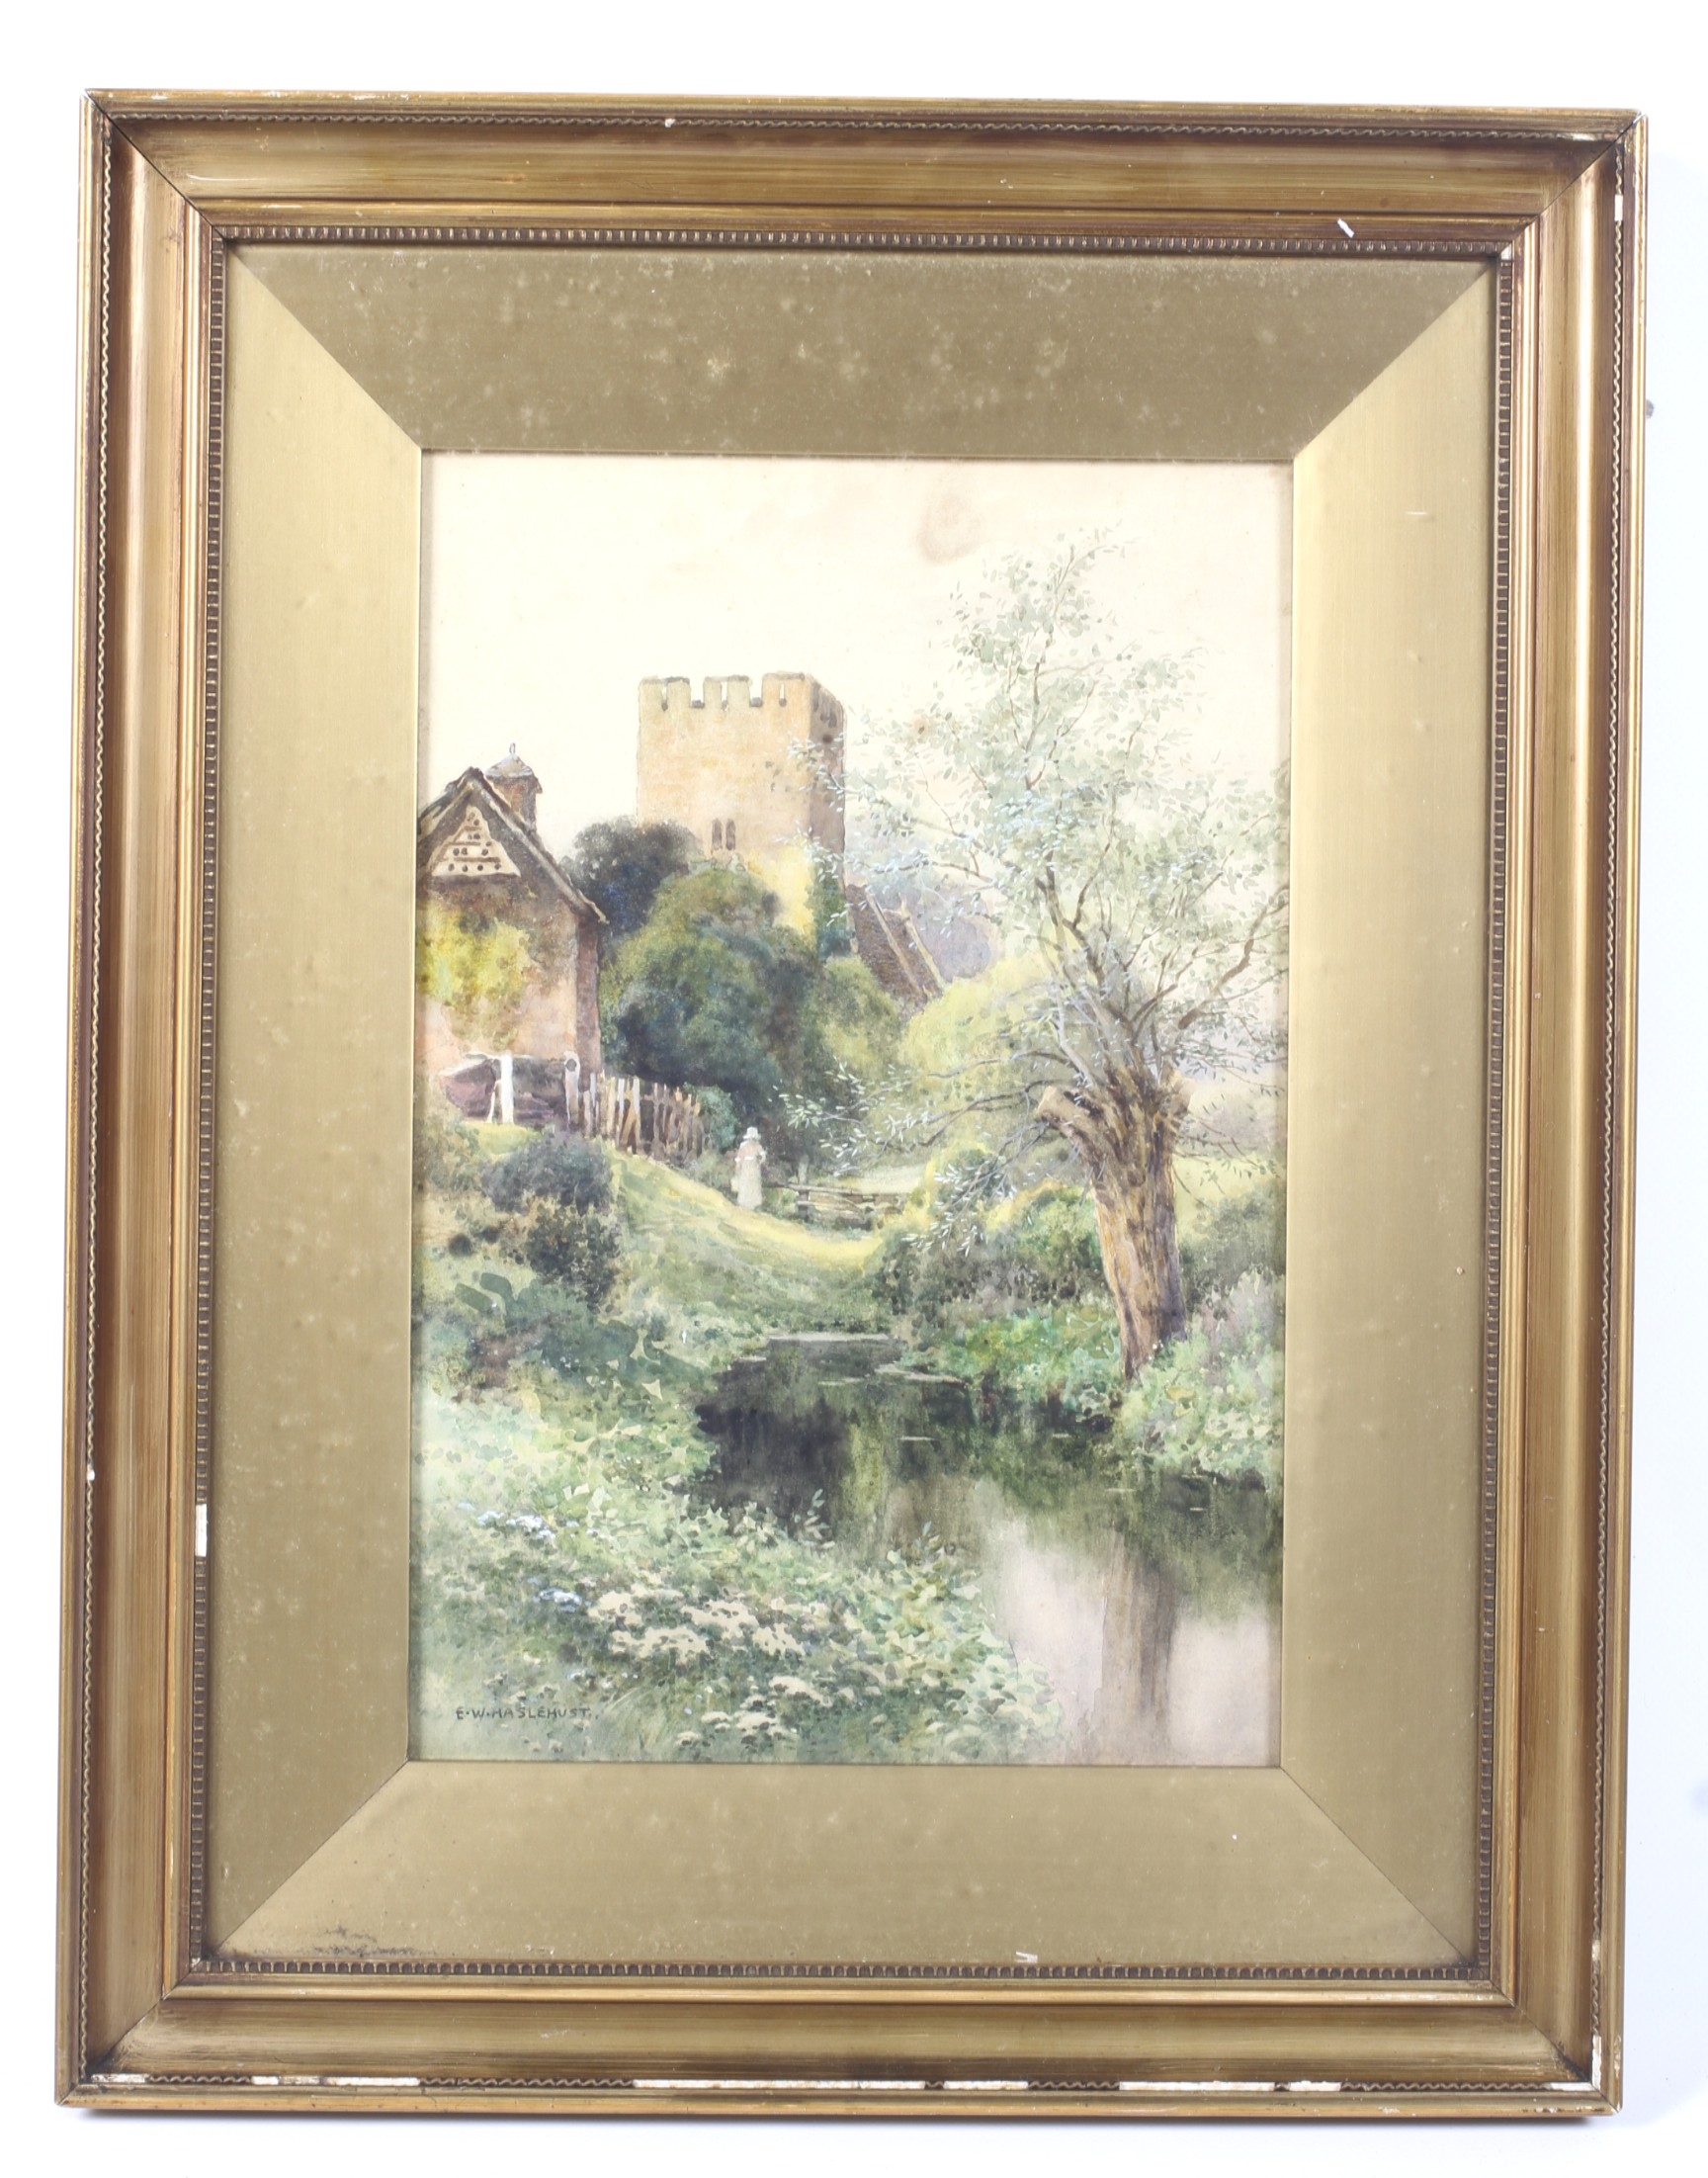 Artwork by Ernest W. Haslehust, St Mary's 'Monnington-on-Wye Church, Hereford', Made of Watercolour